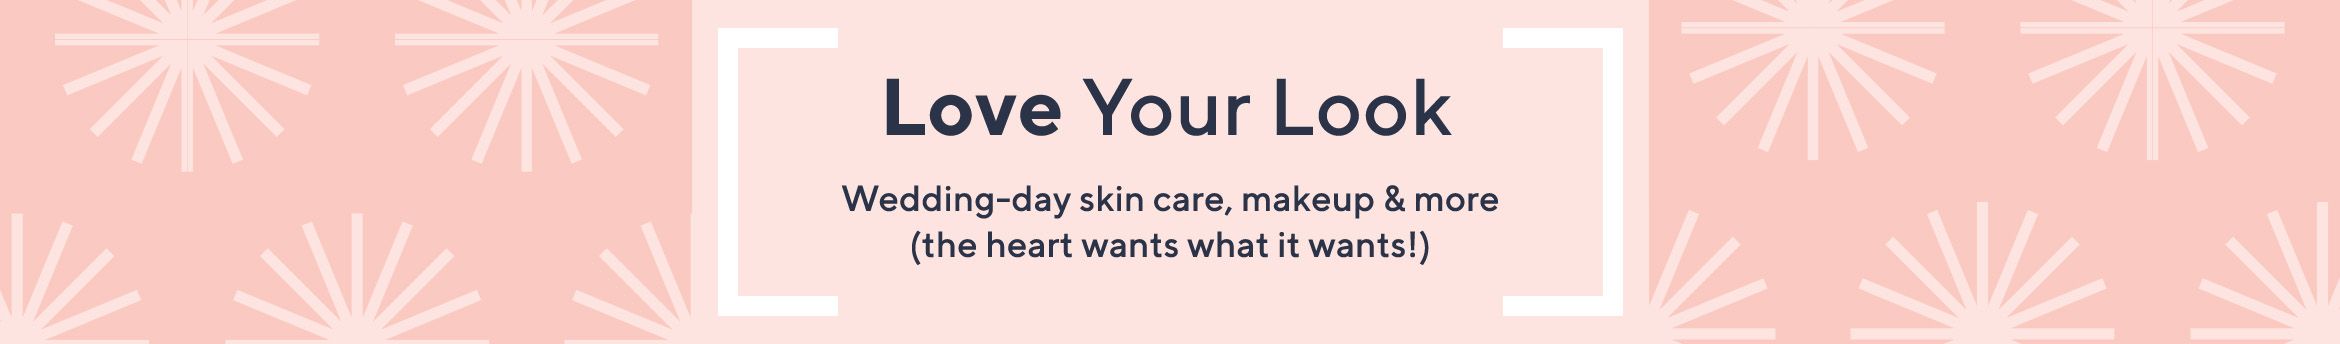 Love Your Look. Wedding-day skin care, makeup & more (the heart wants what it wants!)